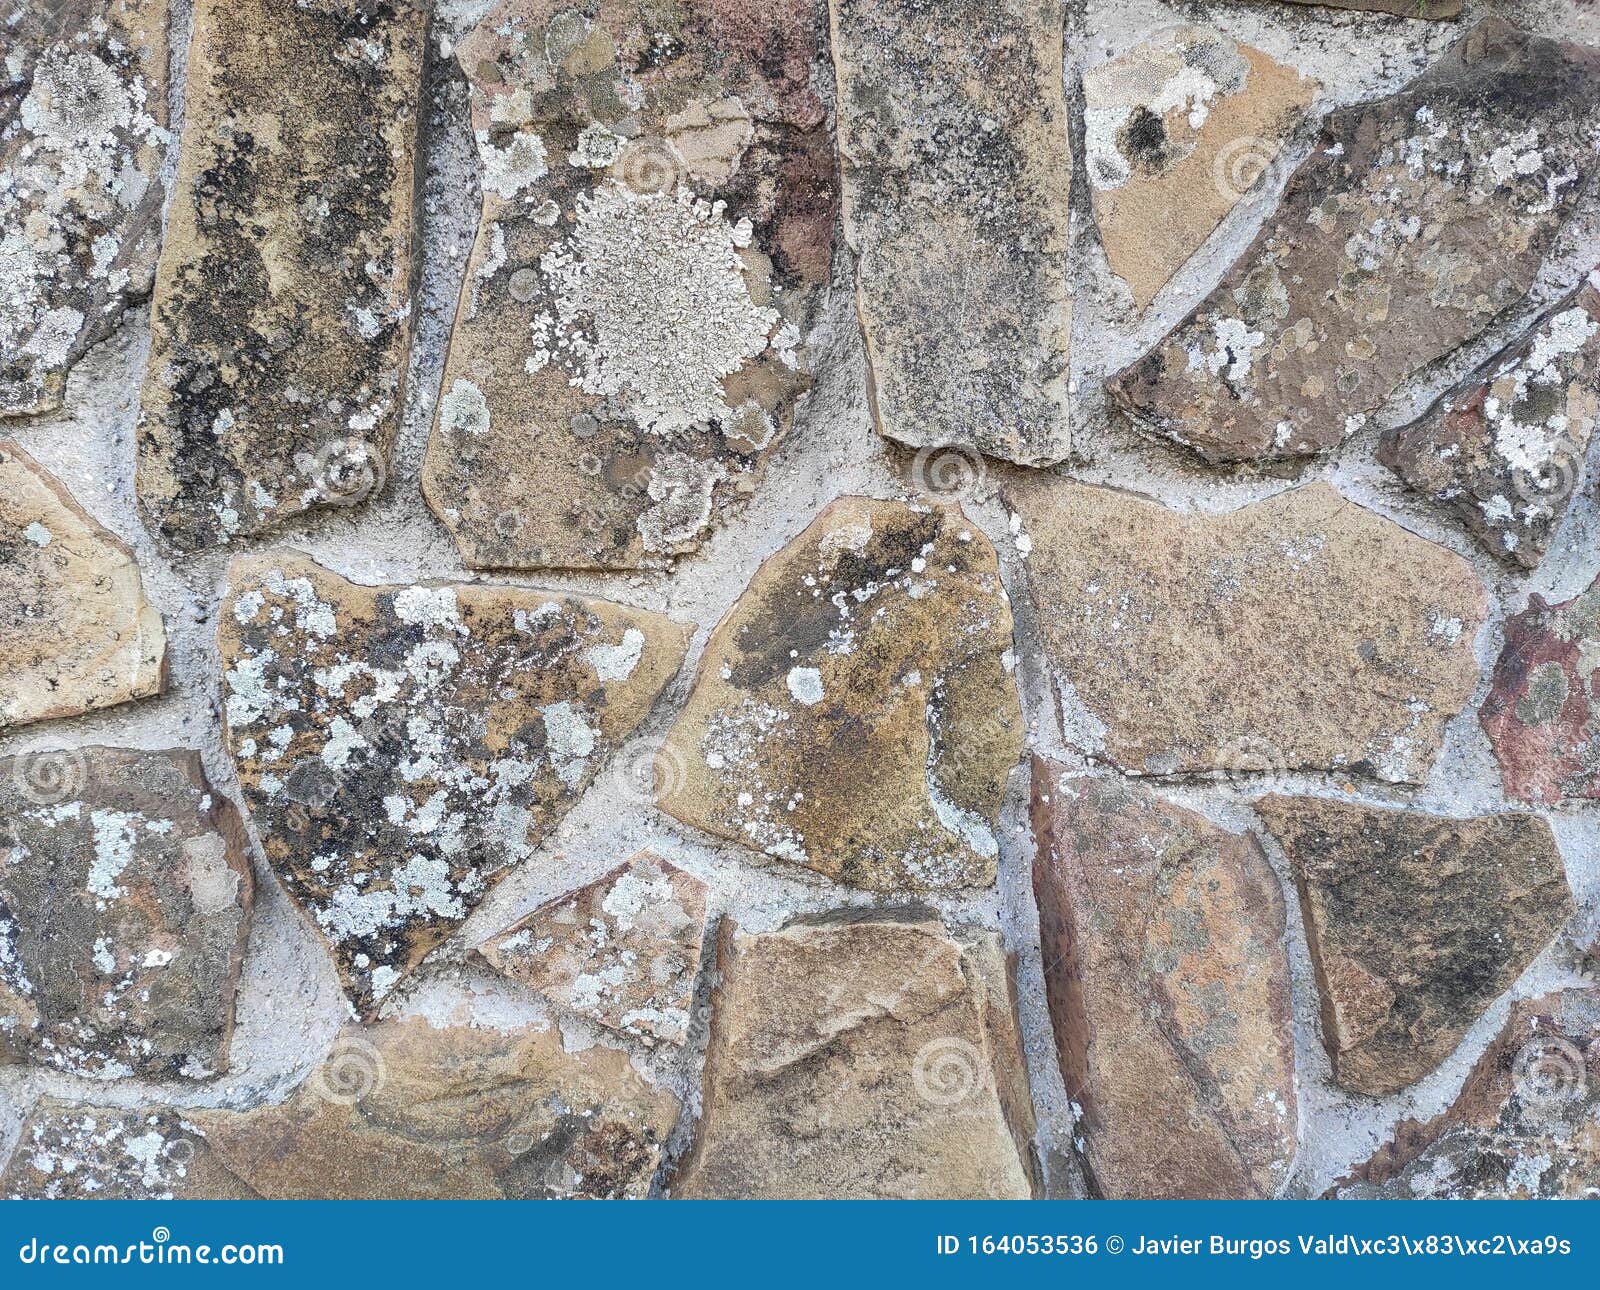 Moldy Rock Wall Texture stock photo. Image of house - 164053536